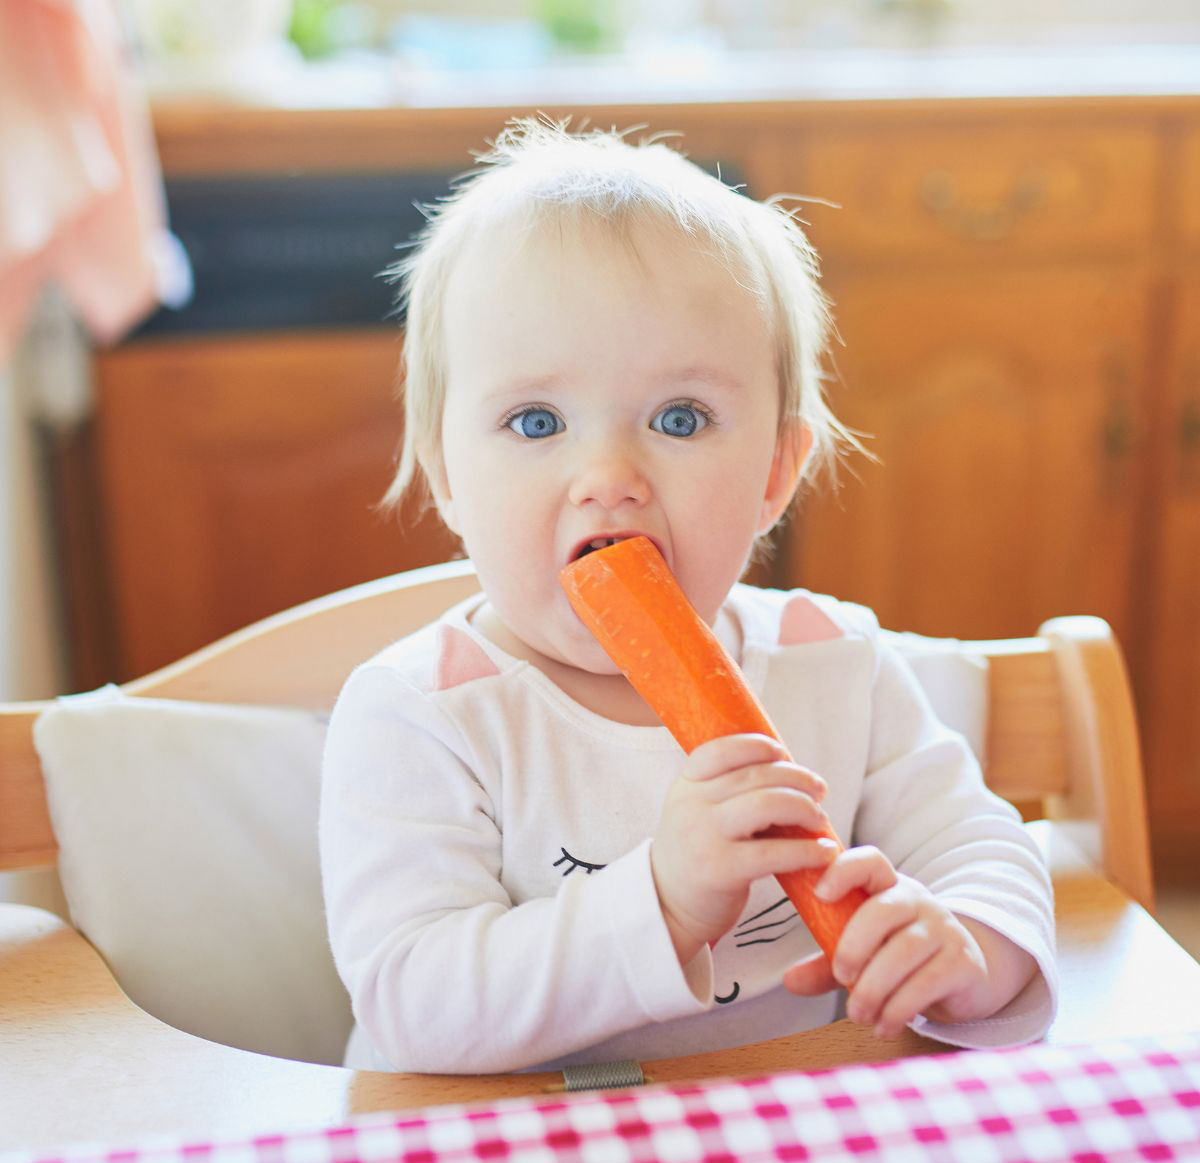 baby eating whole raw carrot